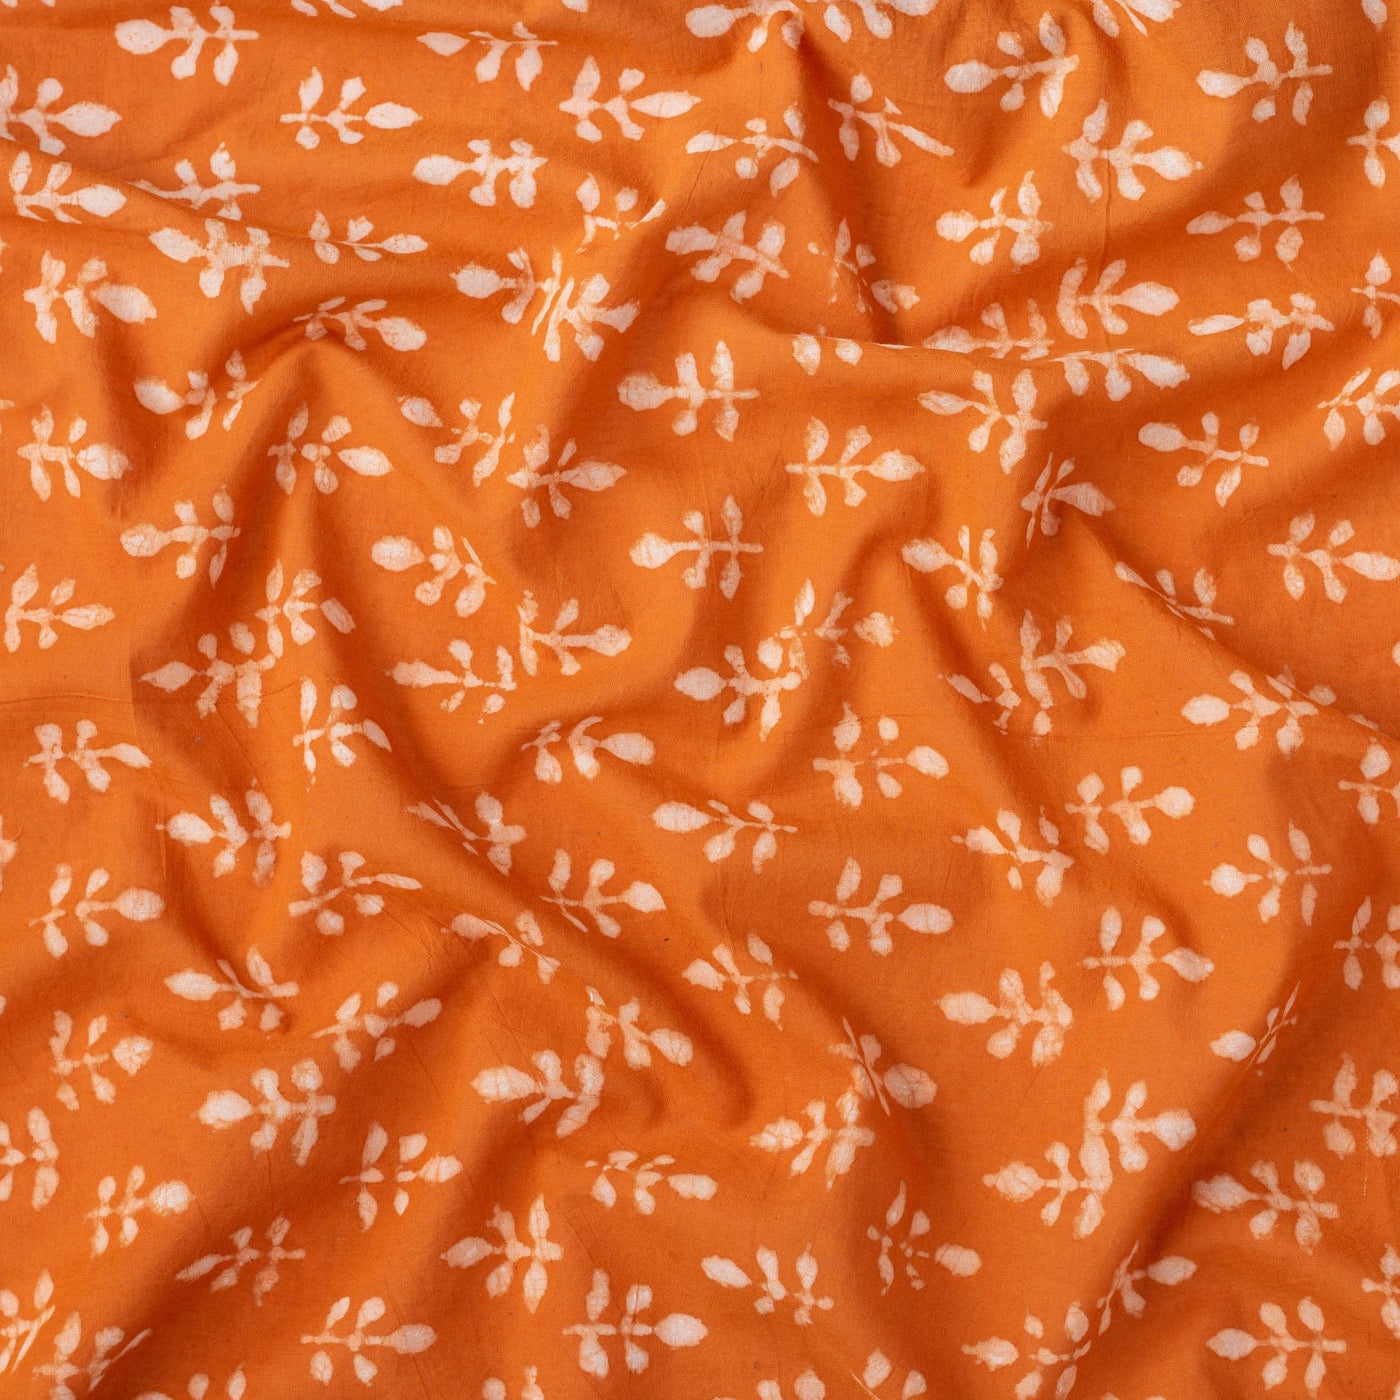 Fabric Pandit Fabric Saffron & White Batik Natural Dyed Paisely Pattern Printed Pure Cotton Cambric Fabric (Width 42 Inches)